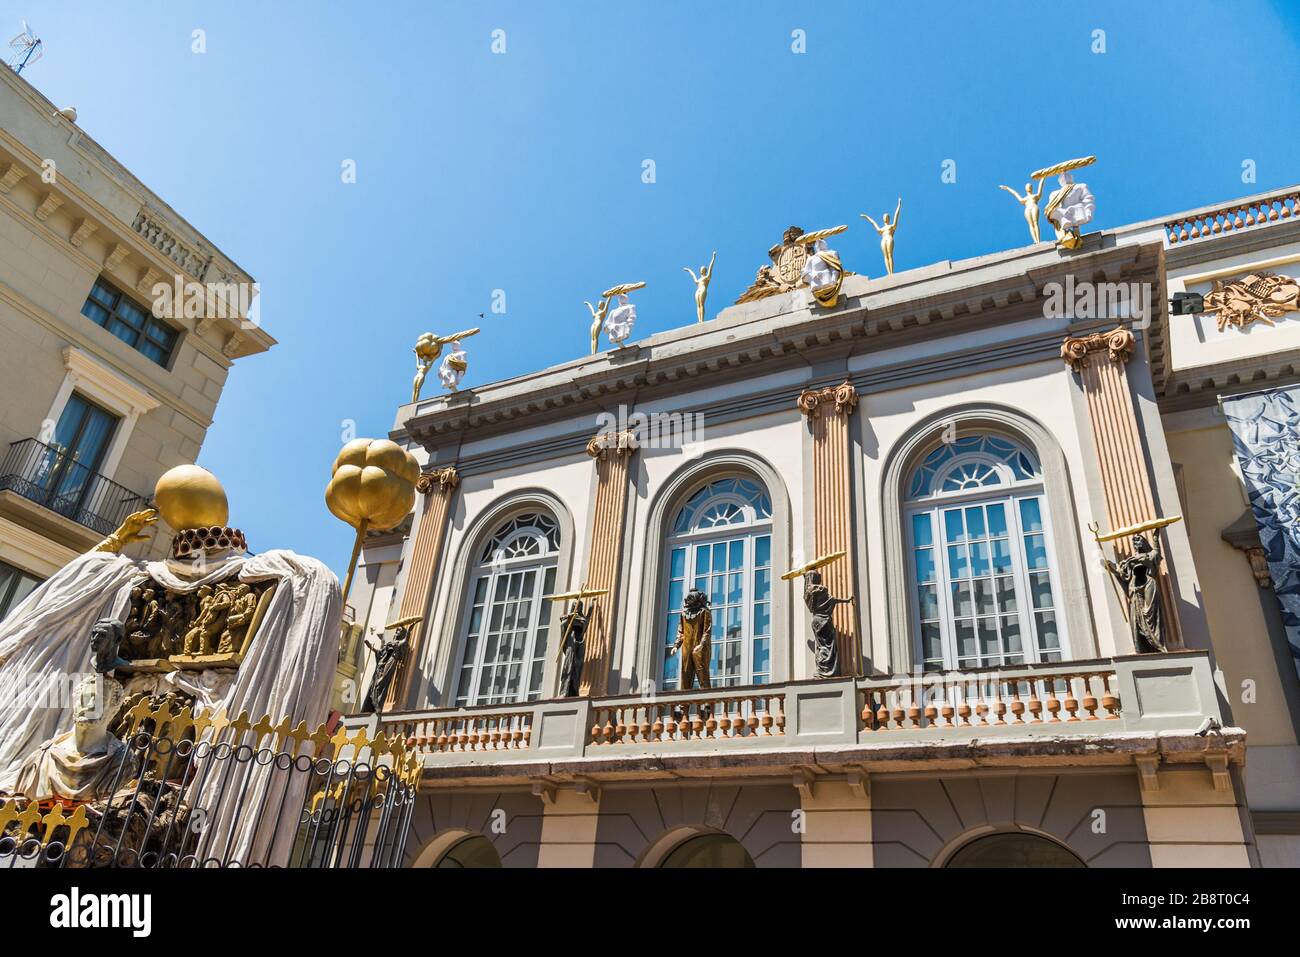 Figueres, Spain - August 3, 2019: Outsides of Gala Salvador Dali museum Stock Photo